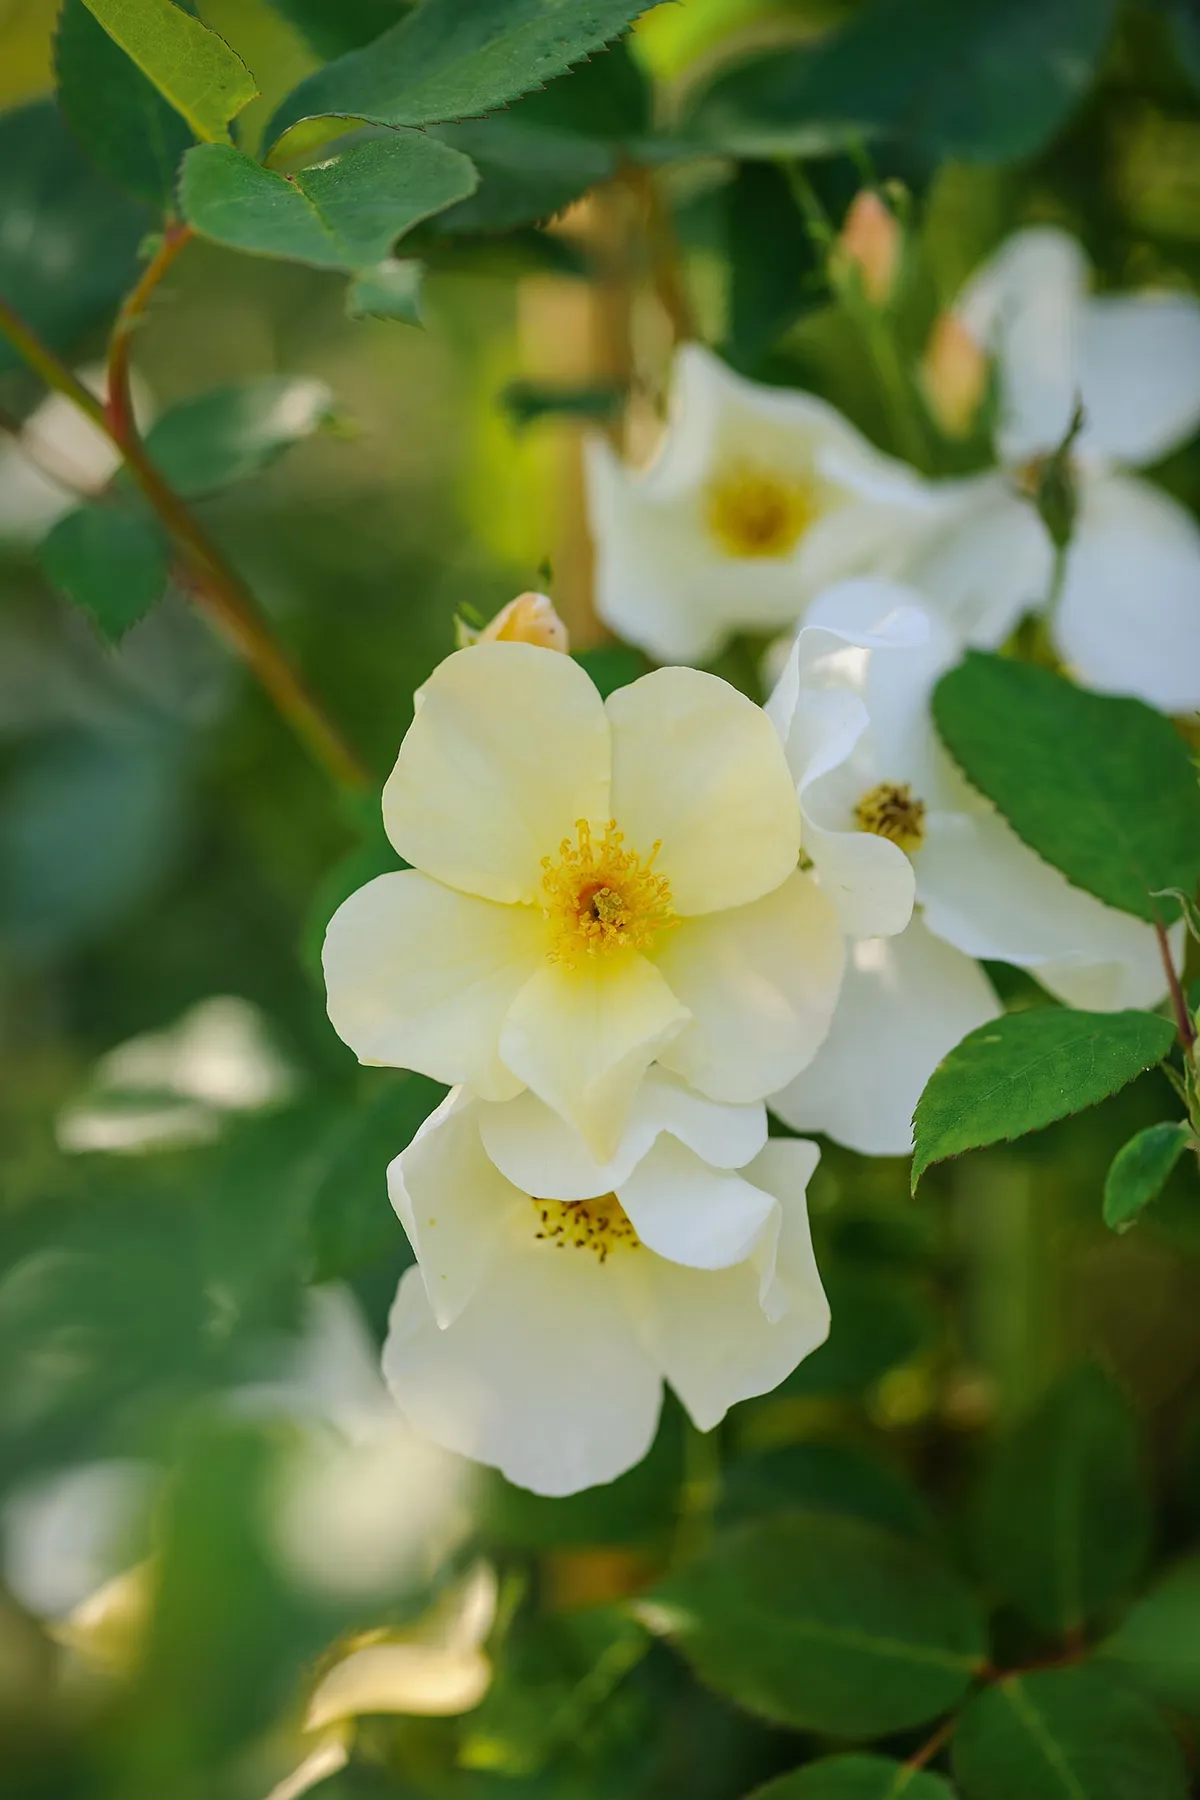 Rosa Kew Gardens (= ‘Ausfence’). A well-behaved shrub rose that holds its flowers in small, neat clusters just proud of the foliage. Flowers open a clotted-cream colour, with a central fuzz of golden stamens, and fade to pure white. Will bloom all summer. 1.2m. AGM. RHS H6.